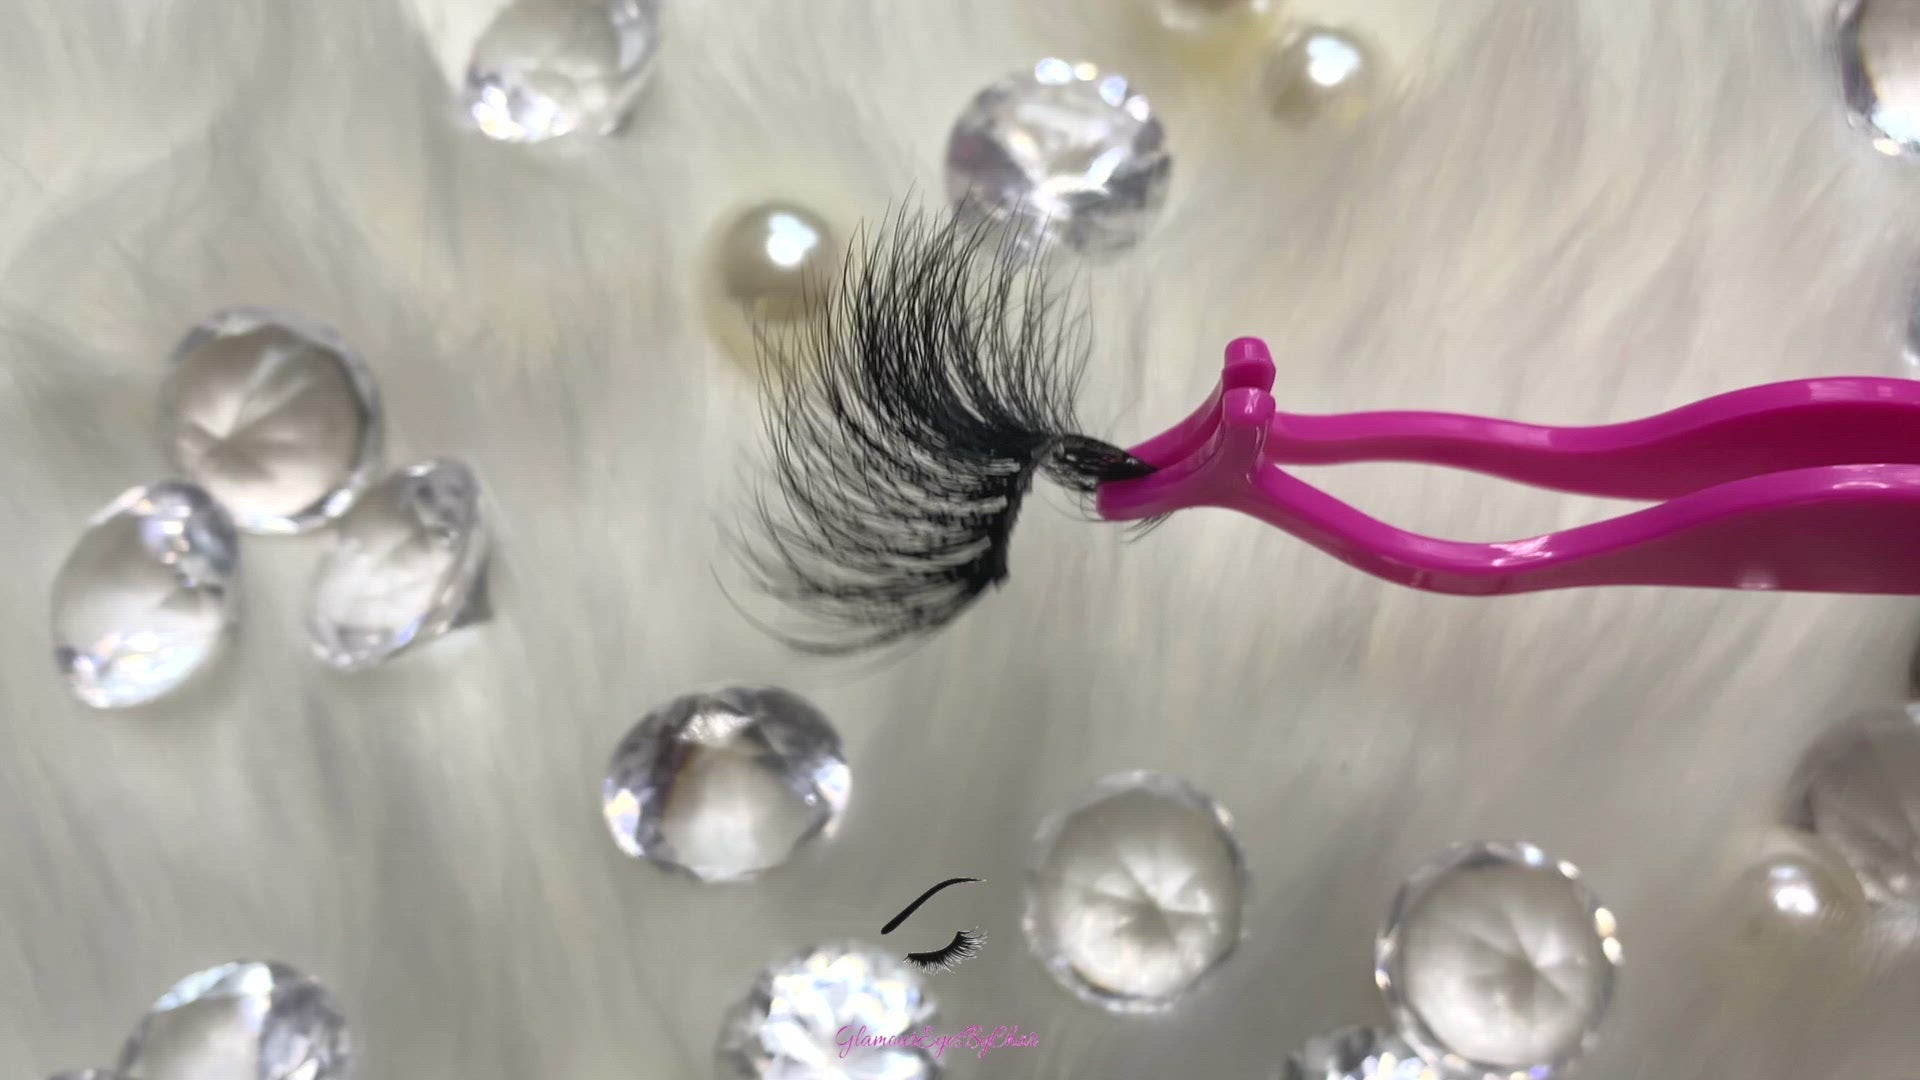 These 3D luxurious mink lashes are called Flutter and are 15-19mm in length. They are light and fluffy, and very comfortable to wear on the lids. The thin lashband, makes the application process a breeze.